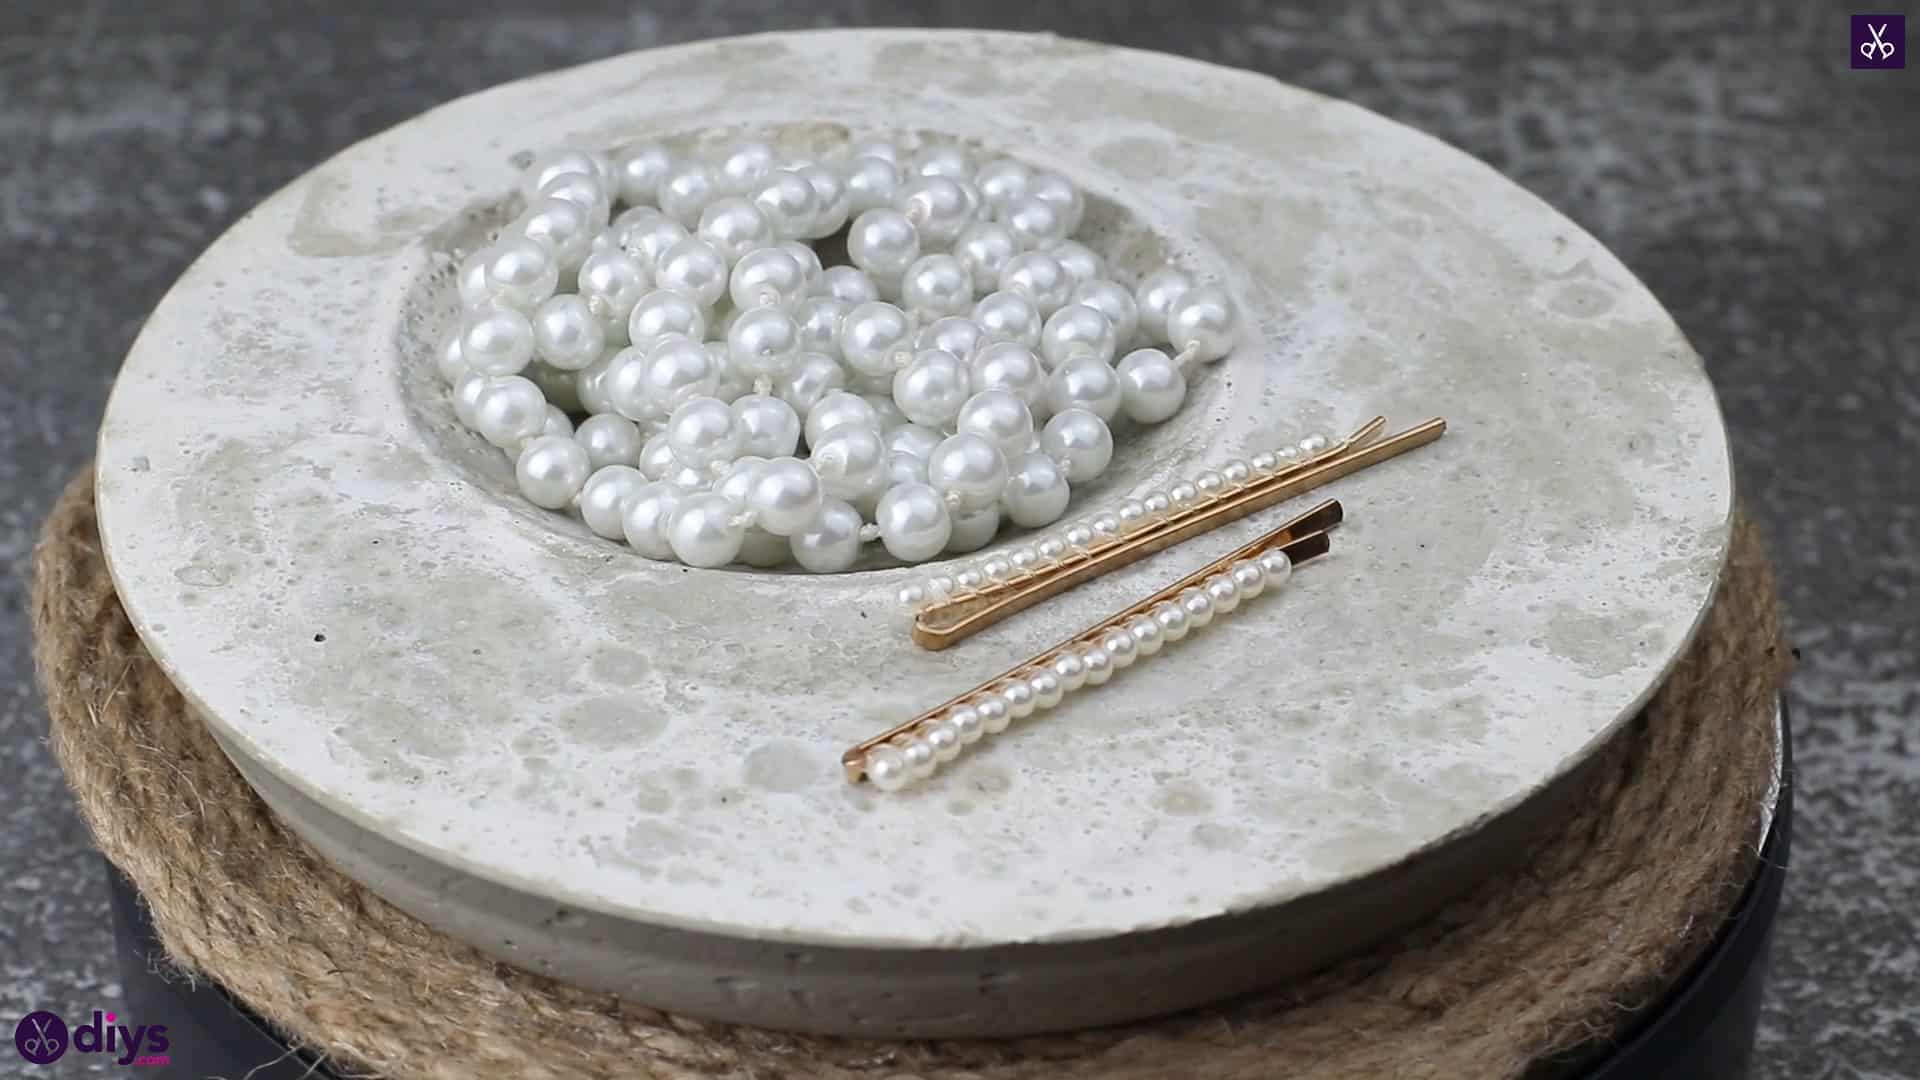 Diy concrete jewelry holder dish on table